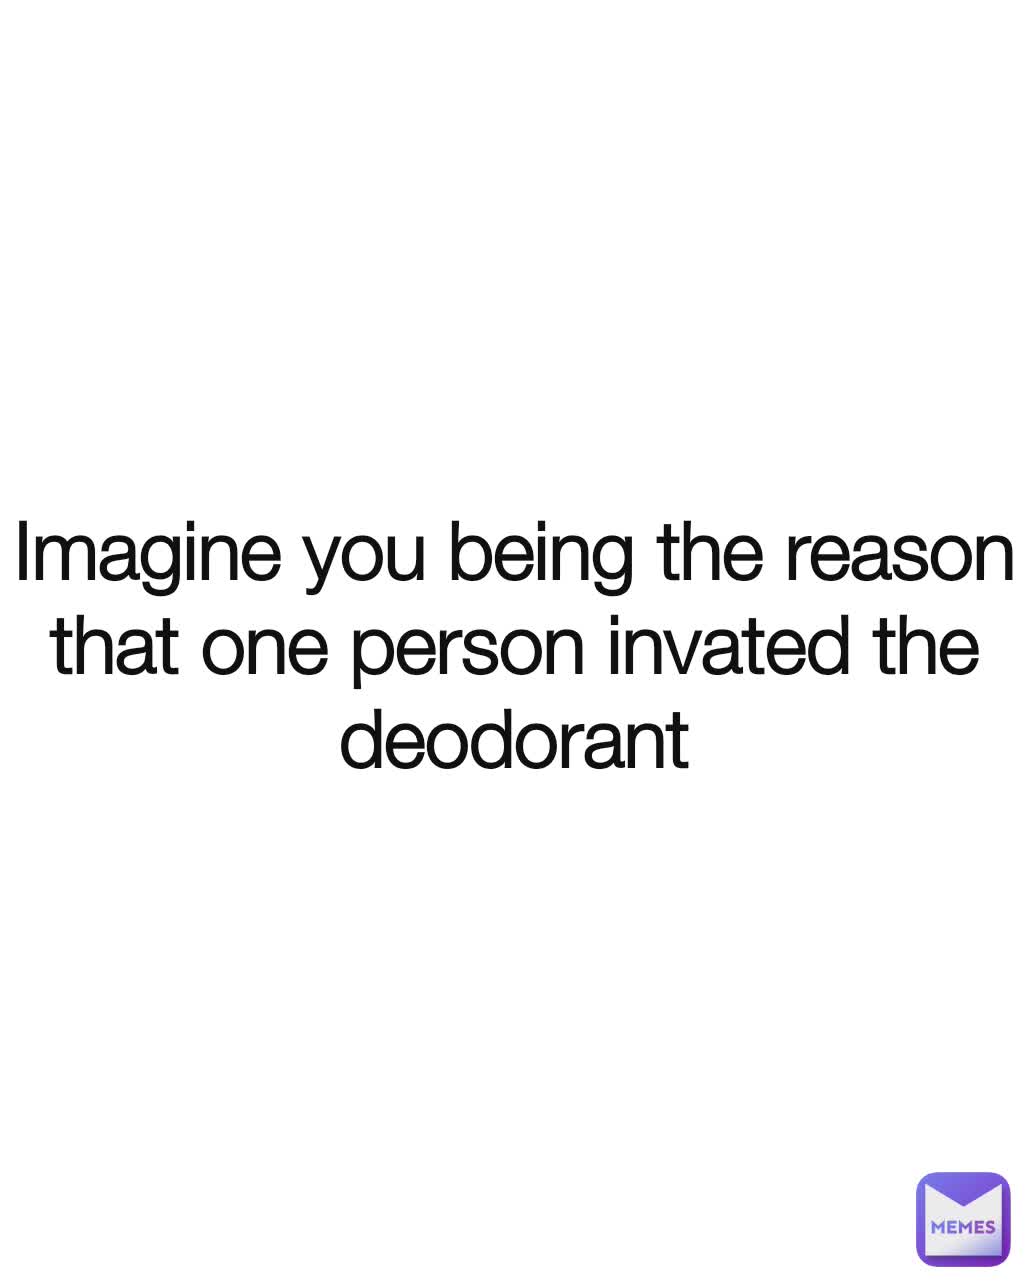 Imagine you being the reason that one person invated the deodorant